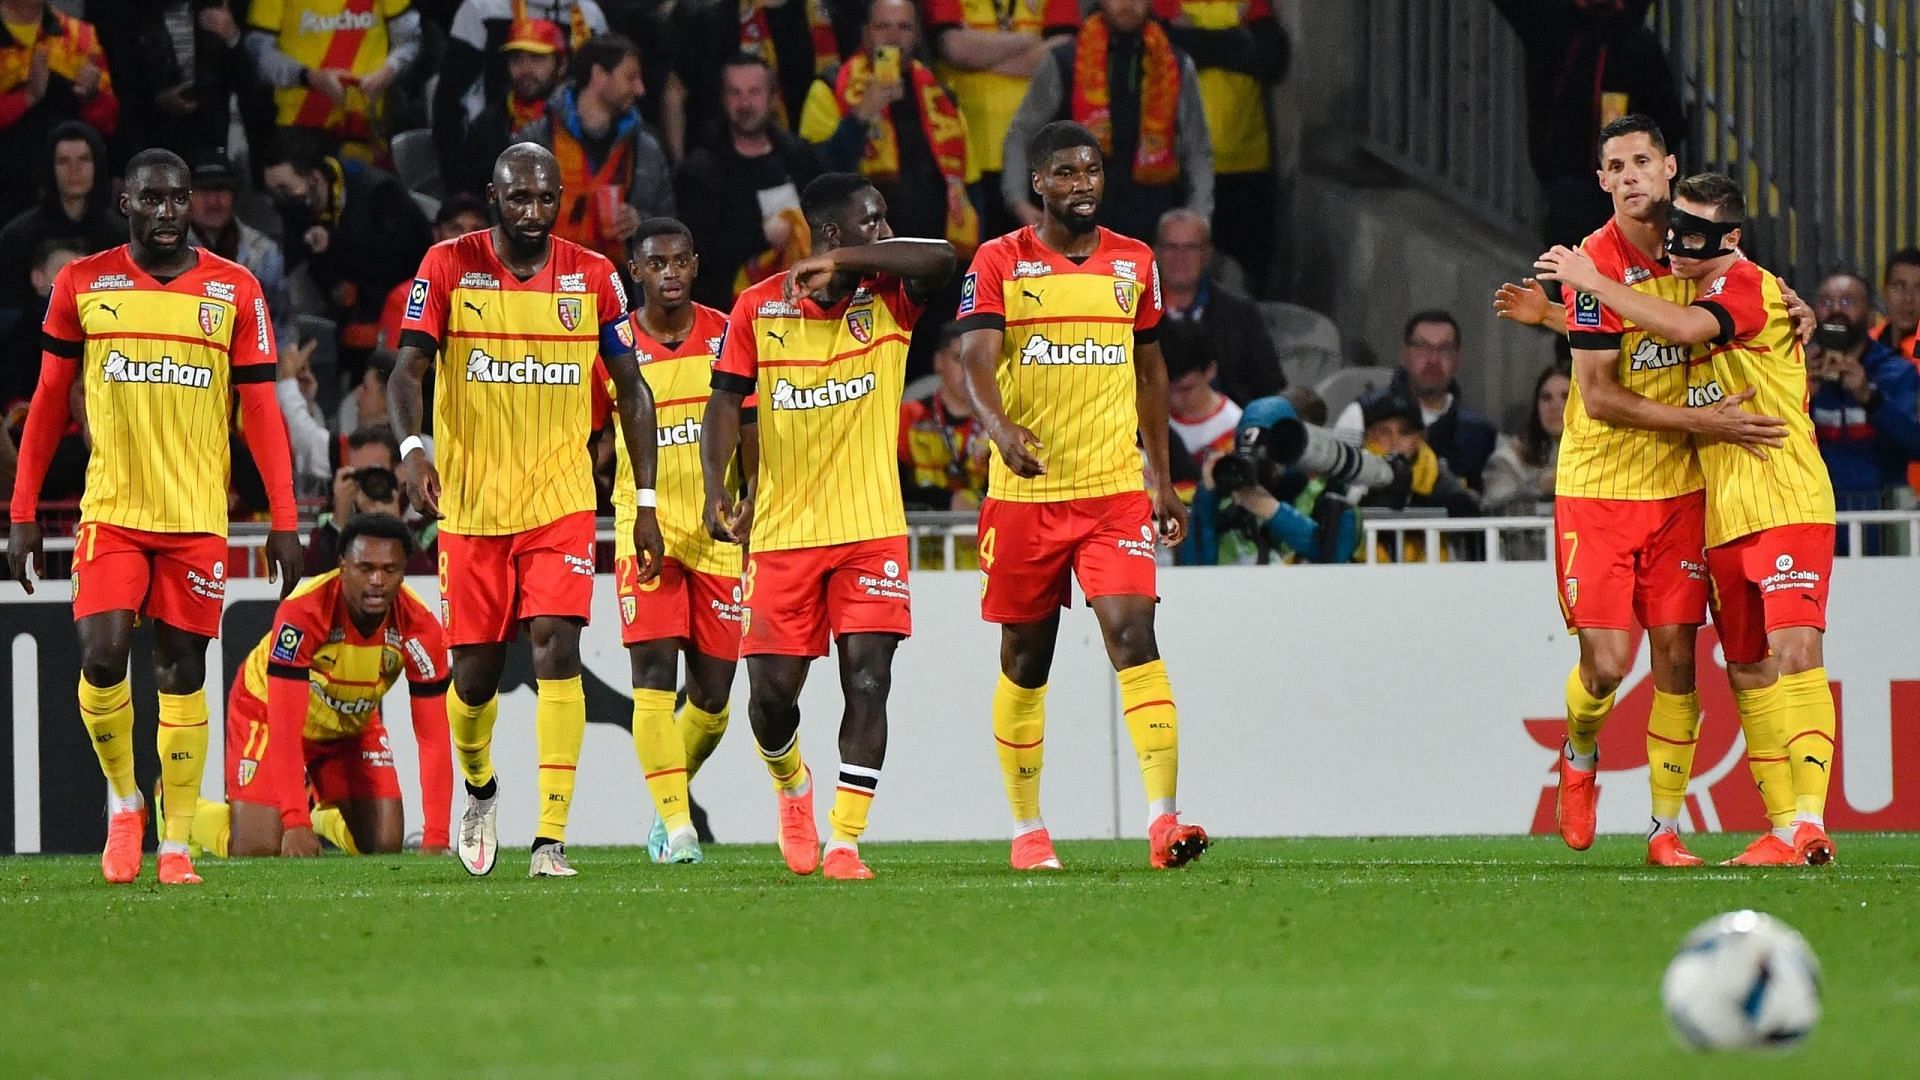 Can Lens continue their hot start to the season by defeating Angers this weekend?